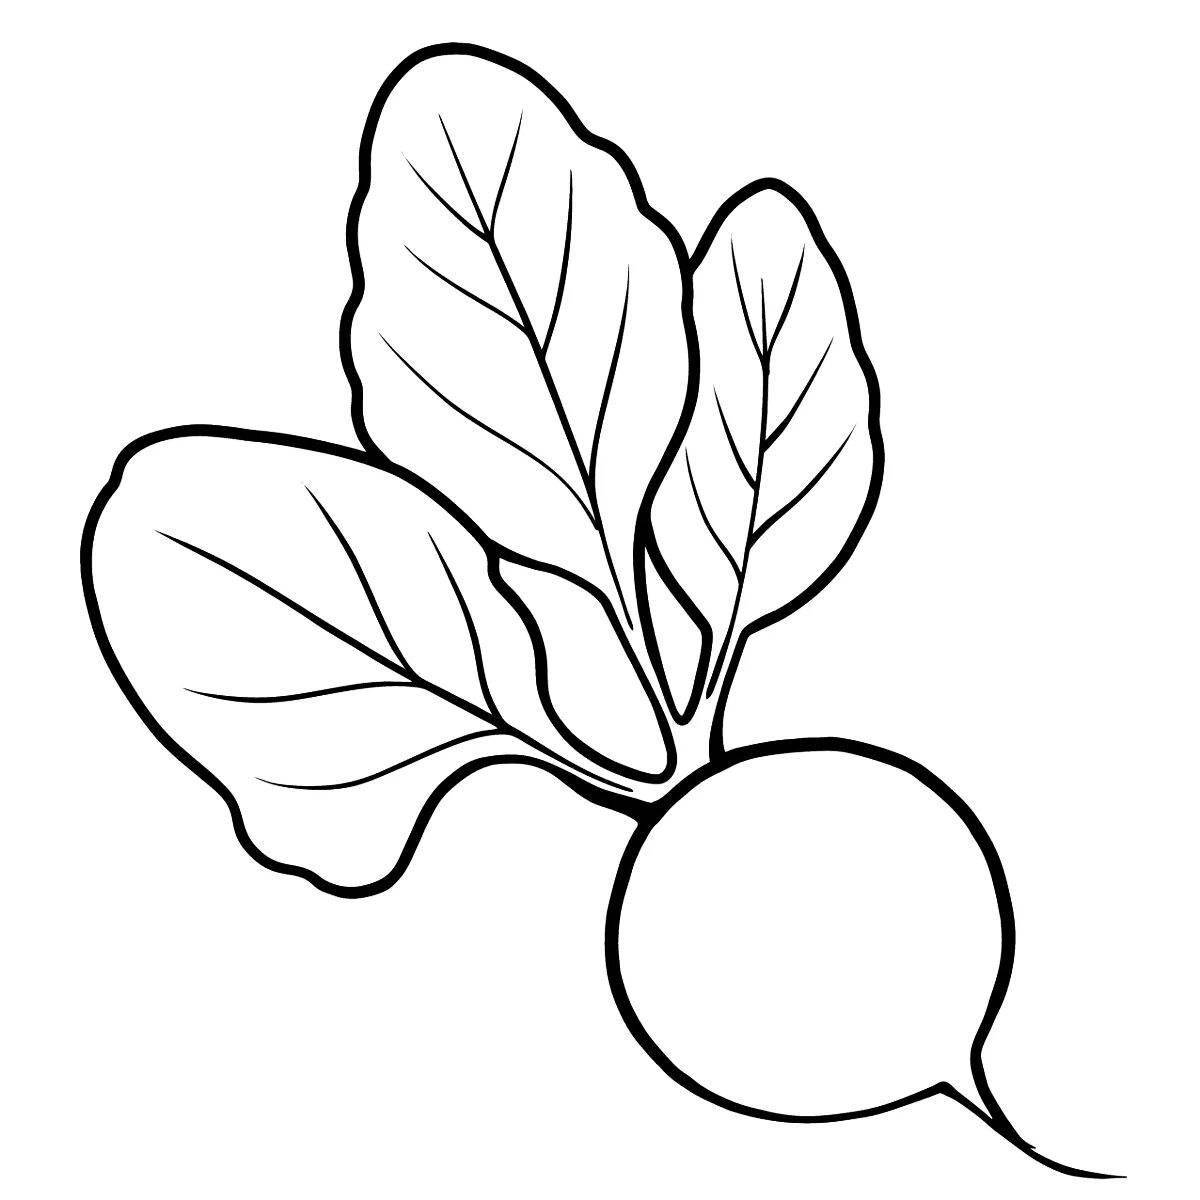 Adorable beetroot coloring book for kids